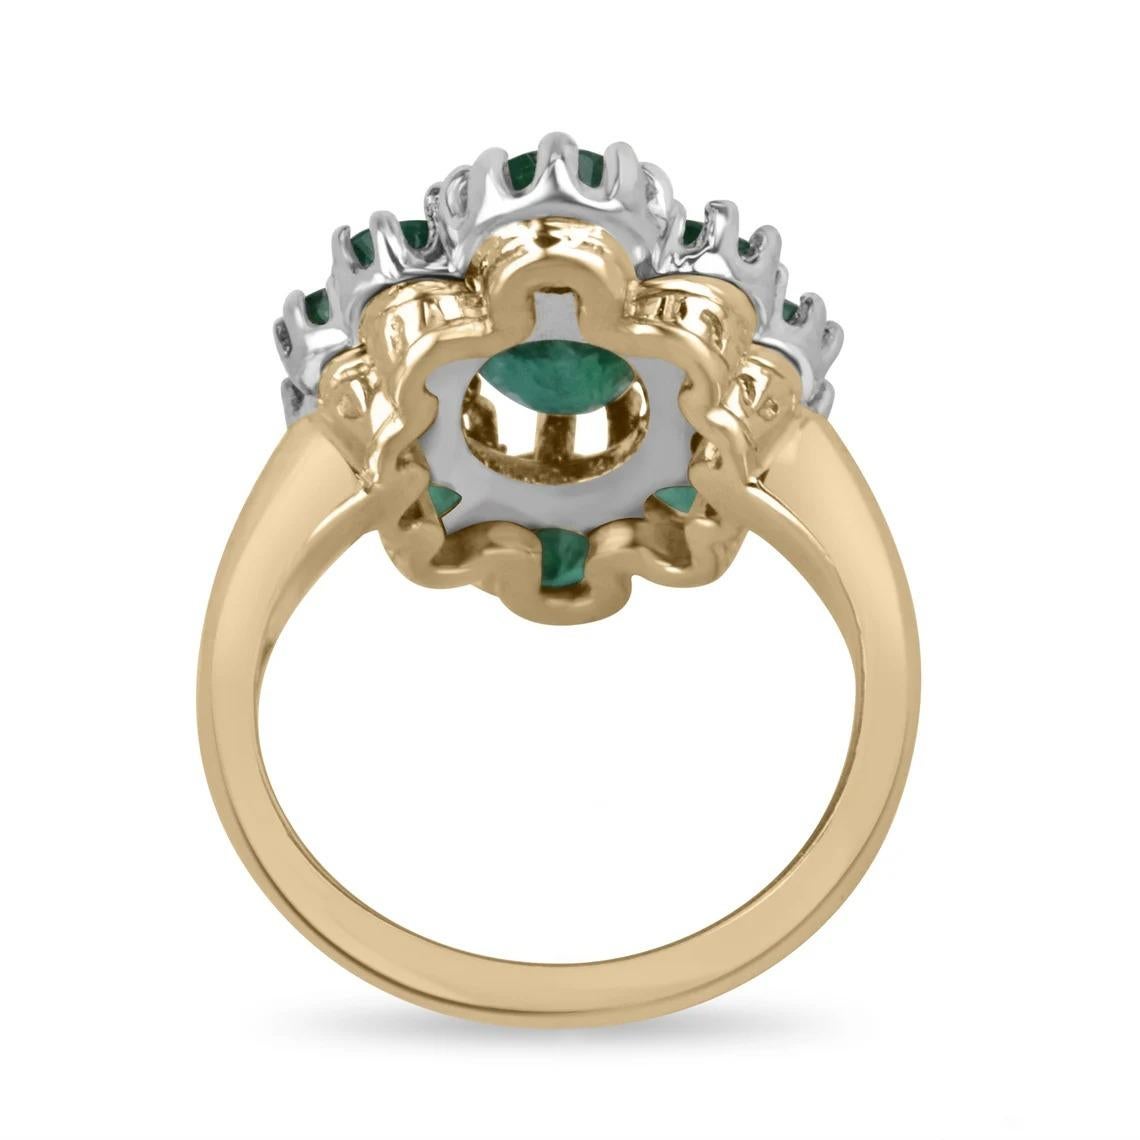 A ravishing, statement multi-emerald statement ring. This piece showcases a stunning 1.50-carat, natural oval emerald right in the center. Numerous, natural, earth-mined round emeralds accent in graduating sizes. The emeralds differ ever so slightly